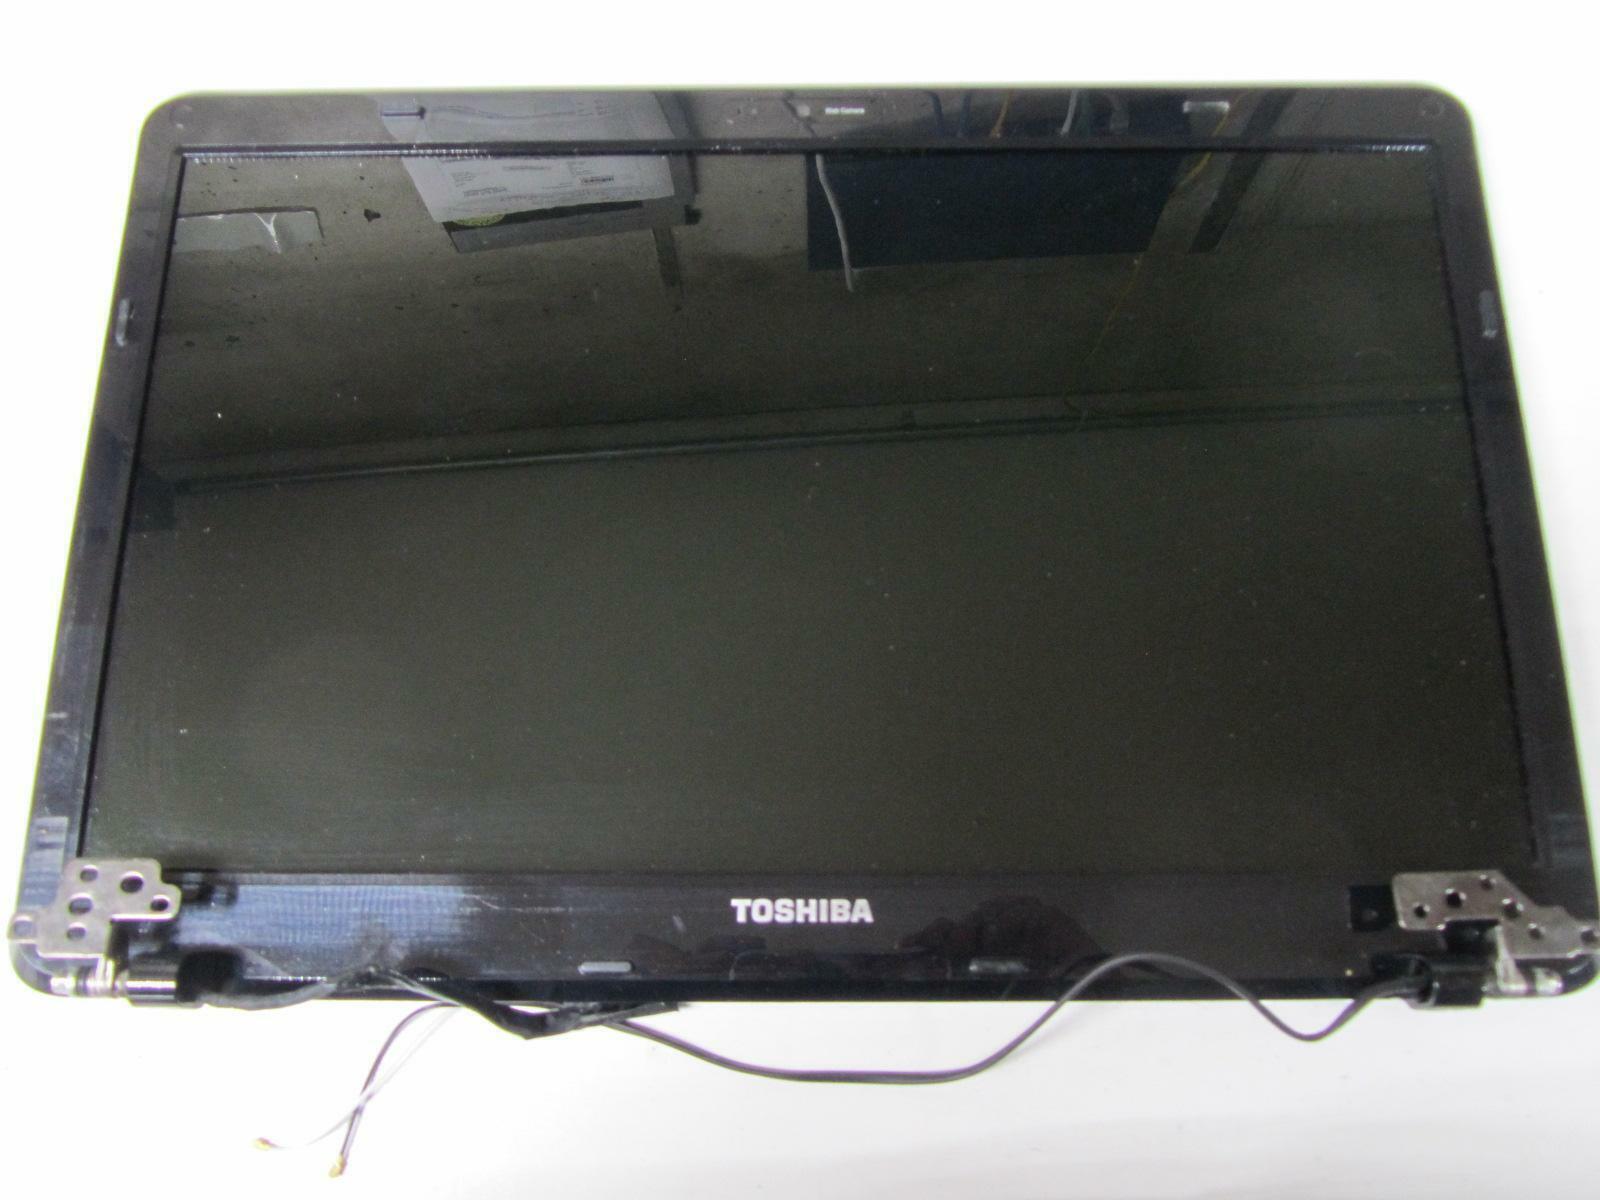 Toshiba Satellite L655-S5105 15.6 in. OEM HD Display w/Cables & Hinges - Tested